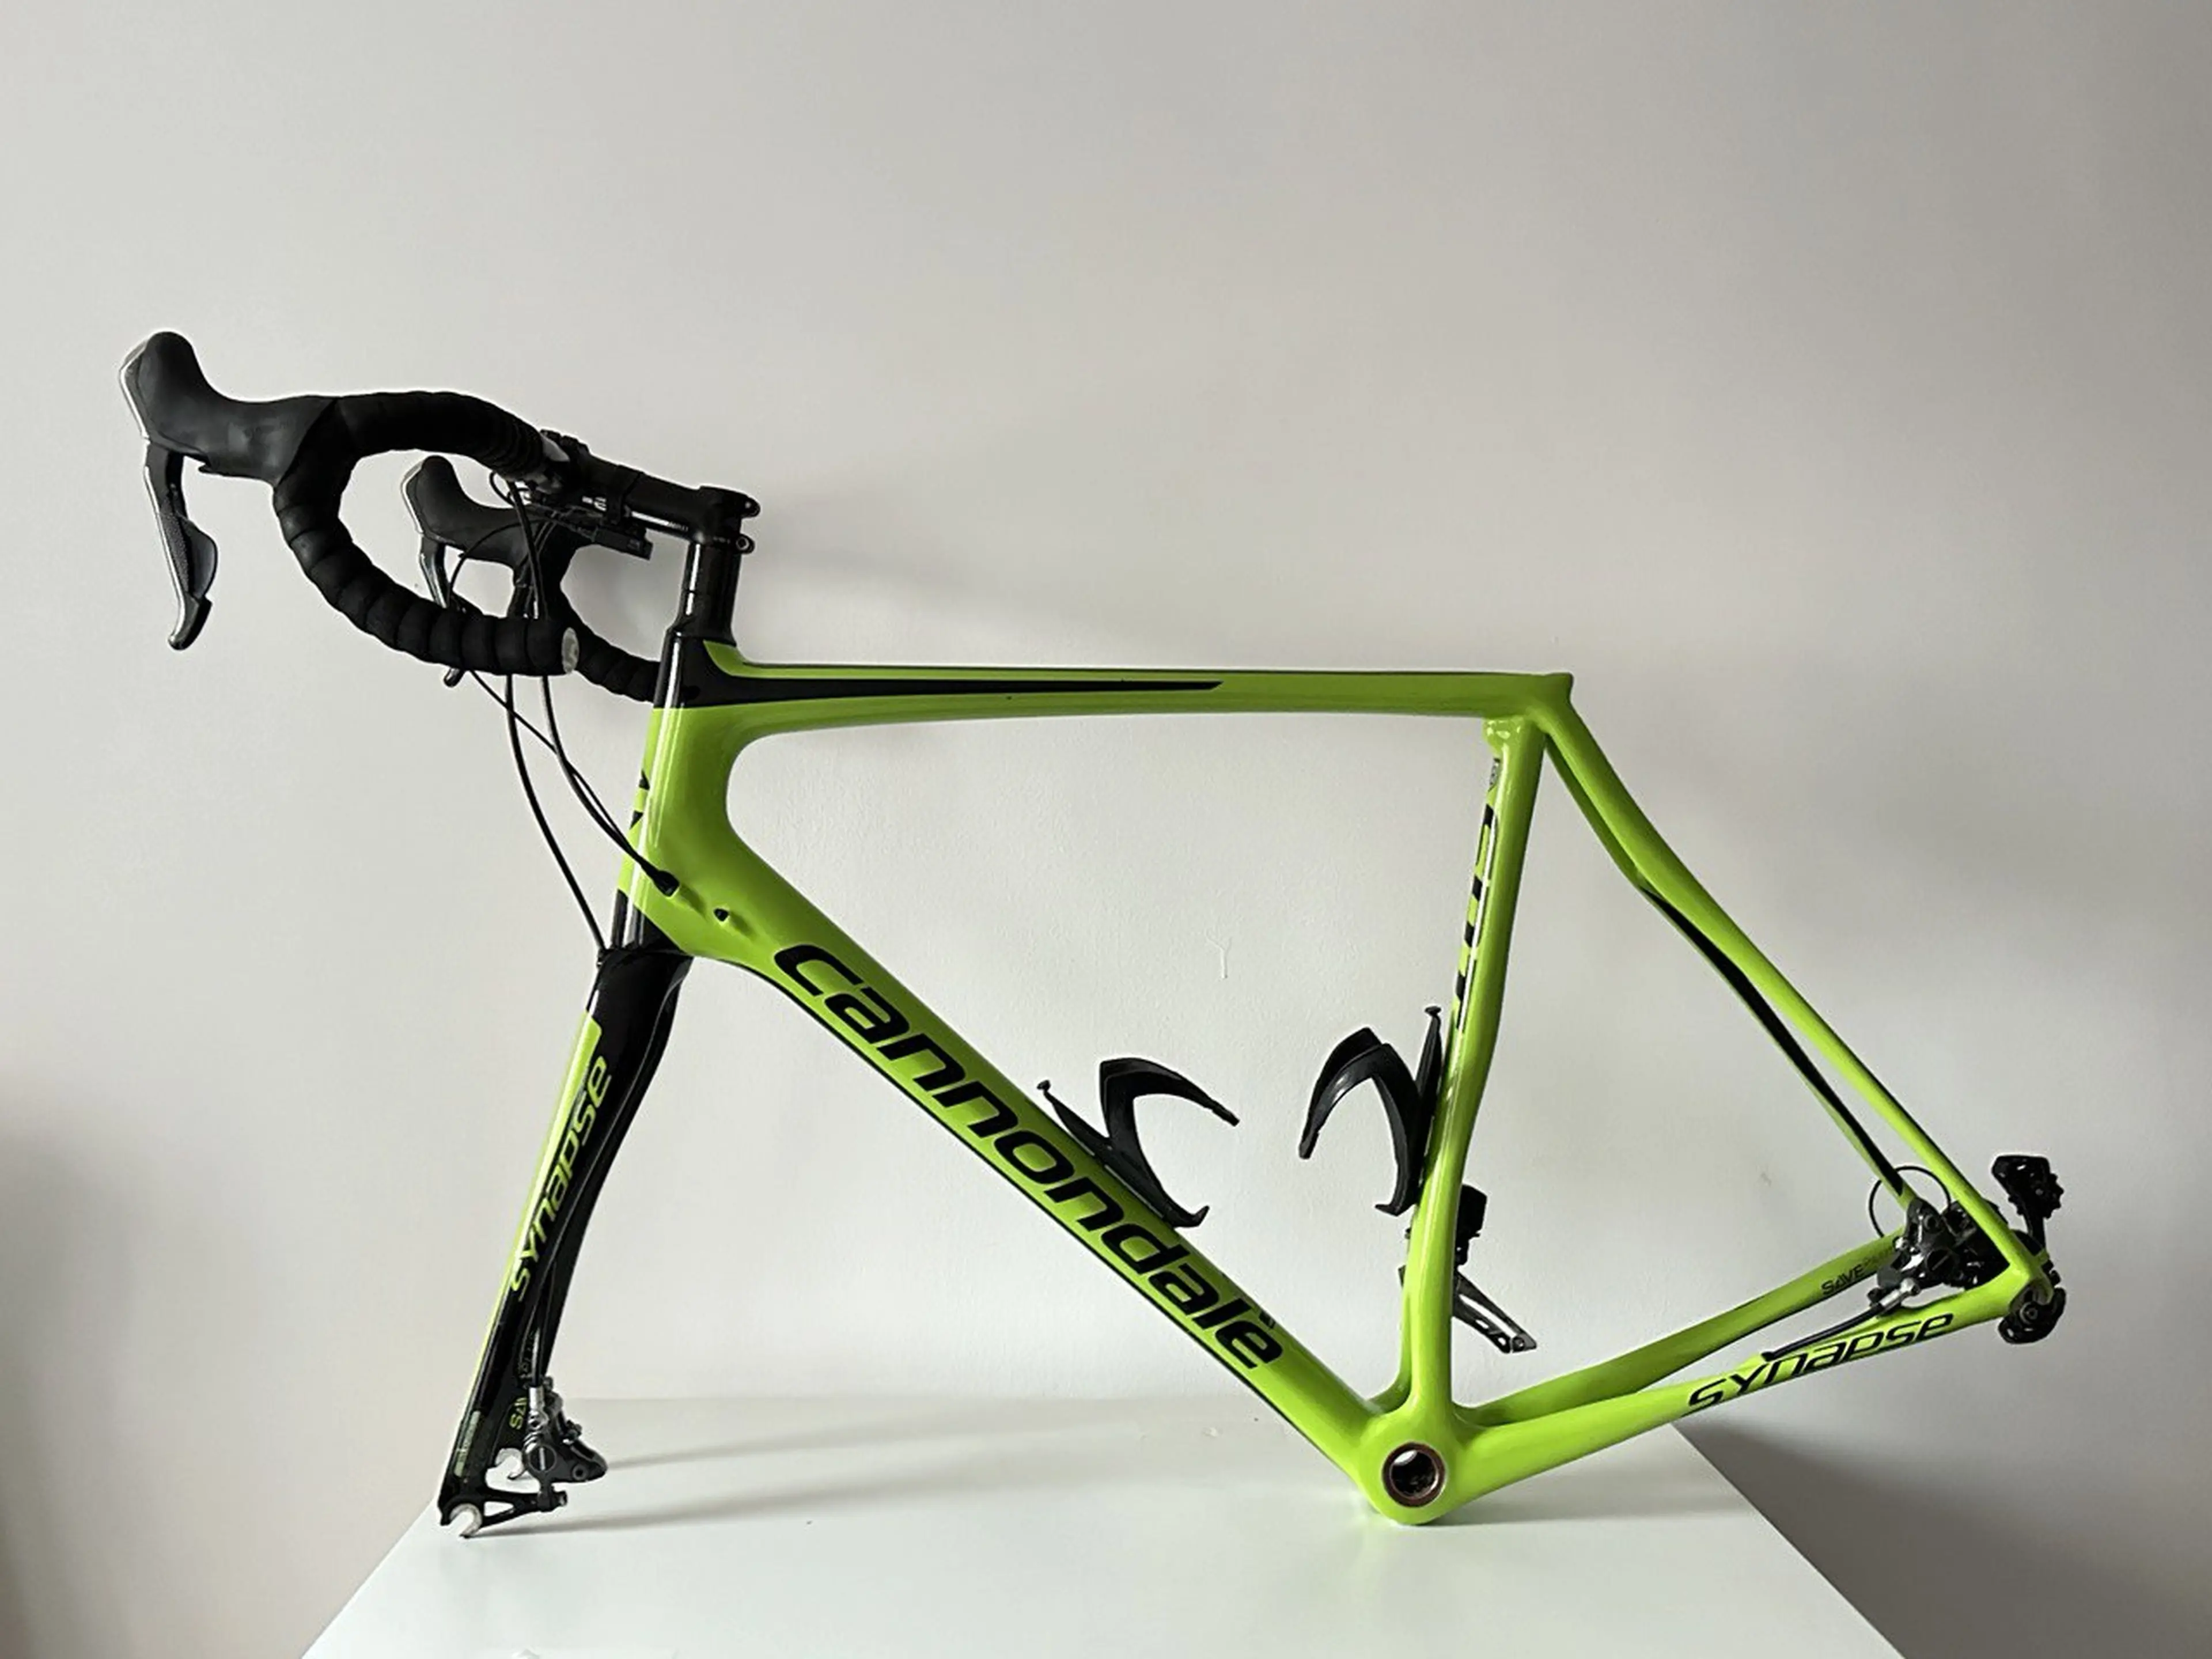 1. Cannondale Synapse Disc + Ultregra Di2 groupset